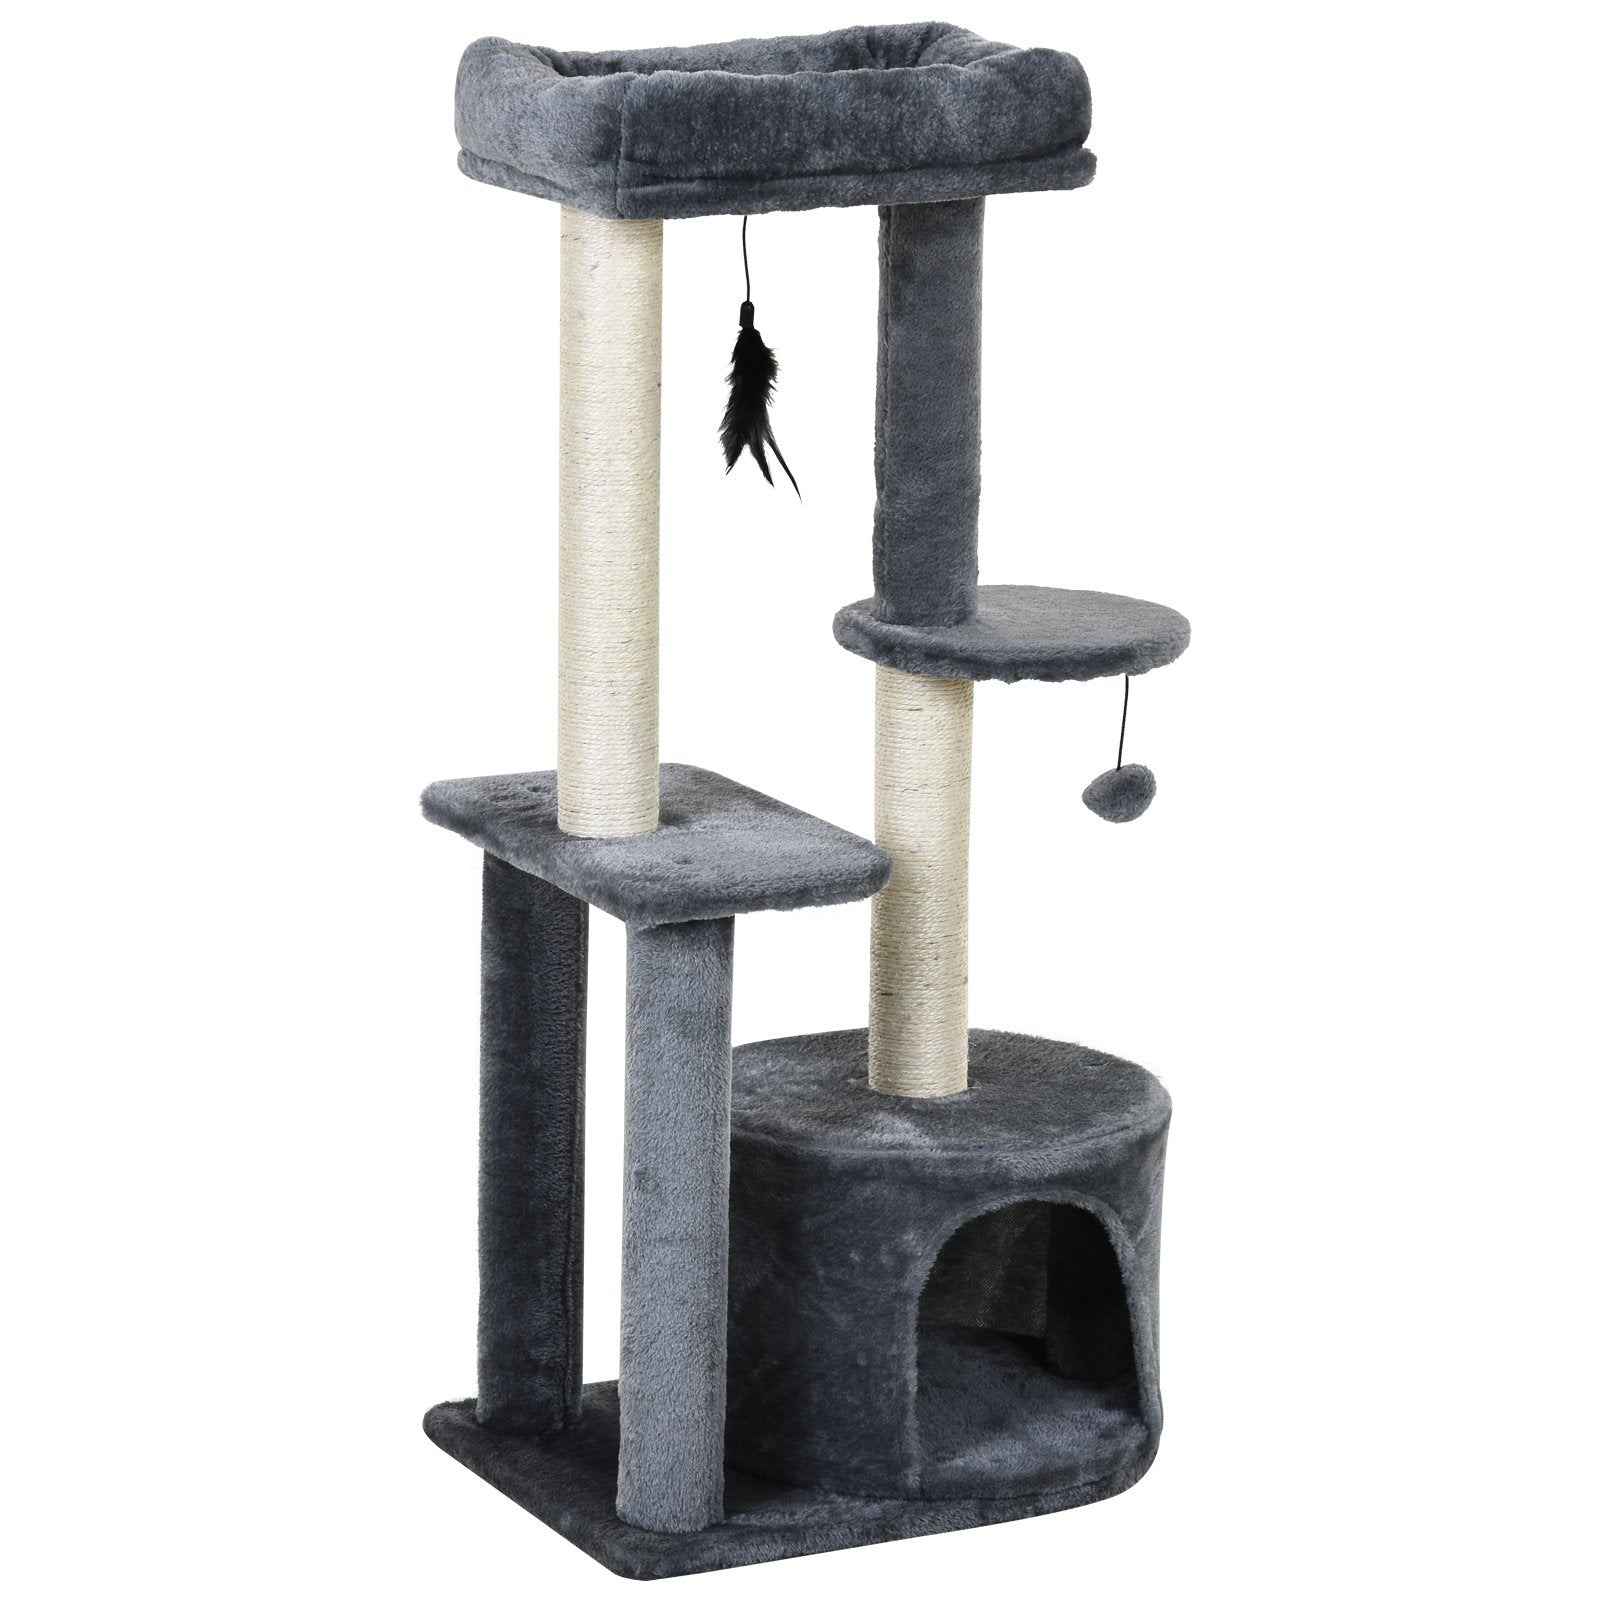 PawHut Cat Multi-Activity Tree Tower w/ Perch House Scratching Post Platform Play Ball Plush Covering Play Rest Relax Grey White - Inspirely